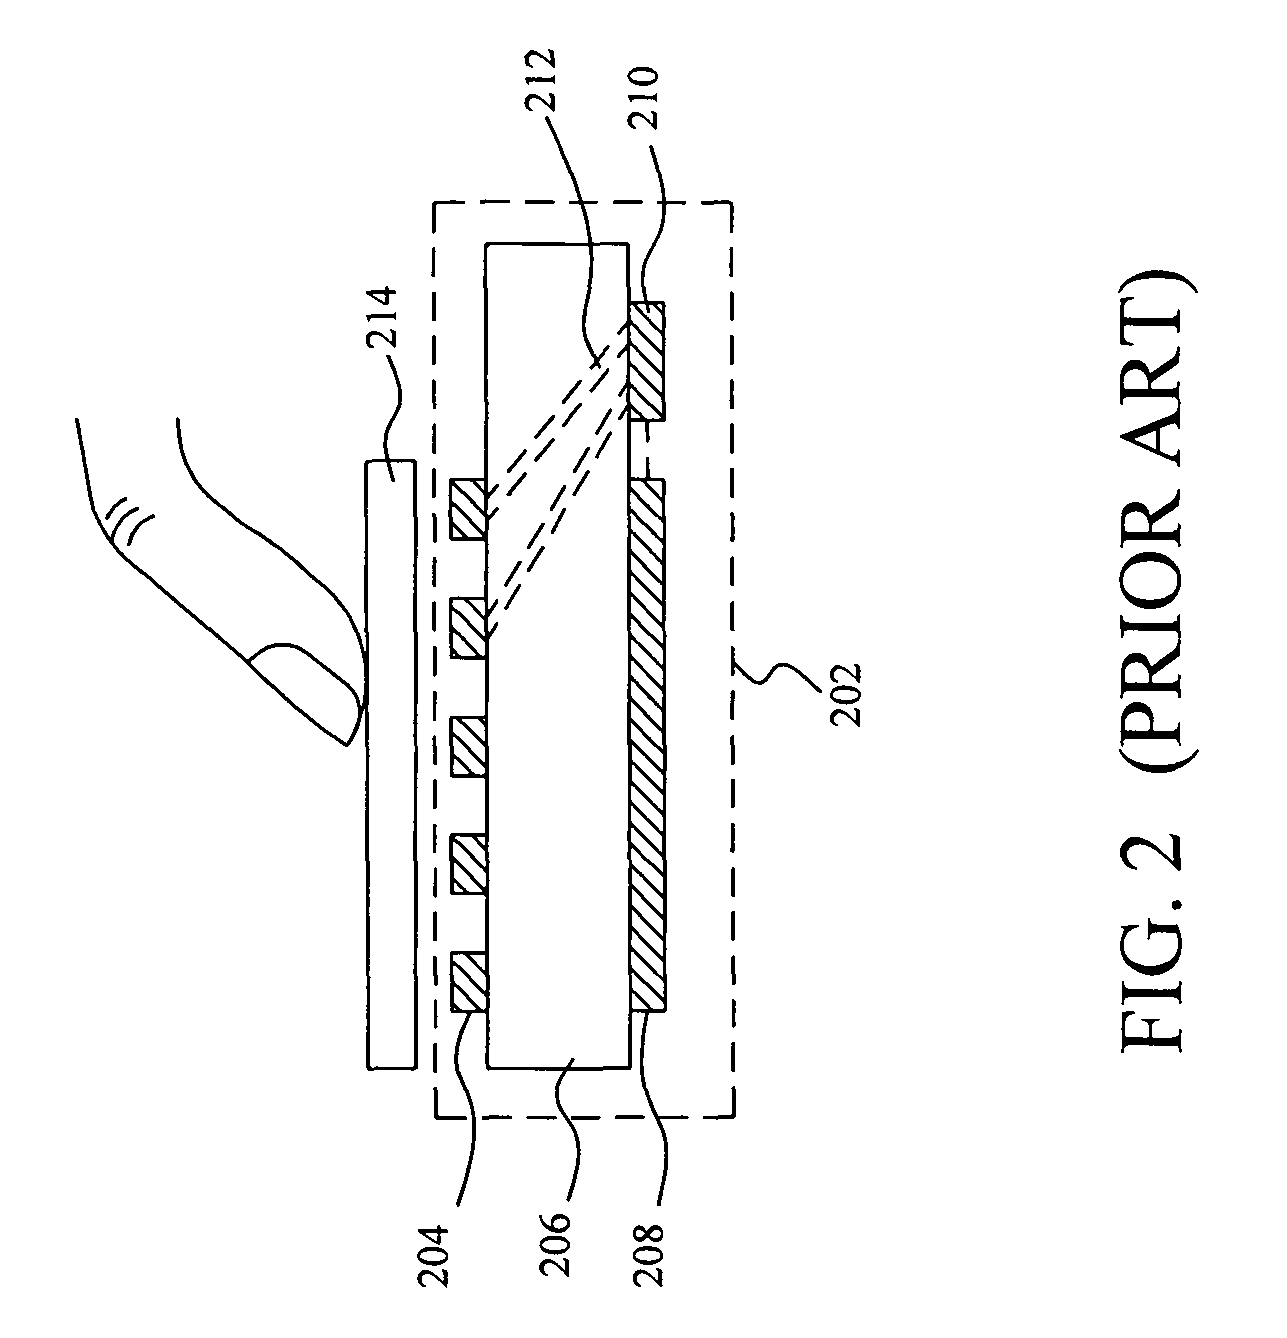 Touchpad with single-layered printed circuit board structure